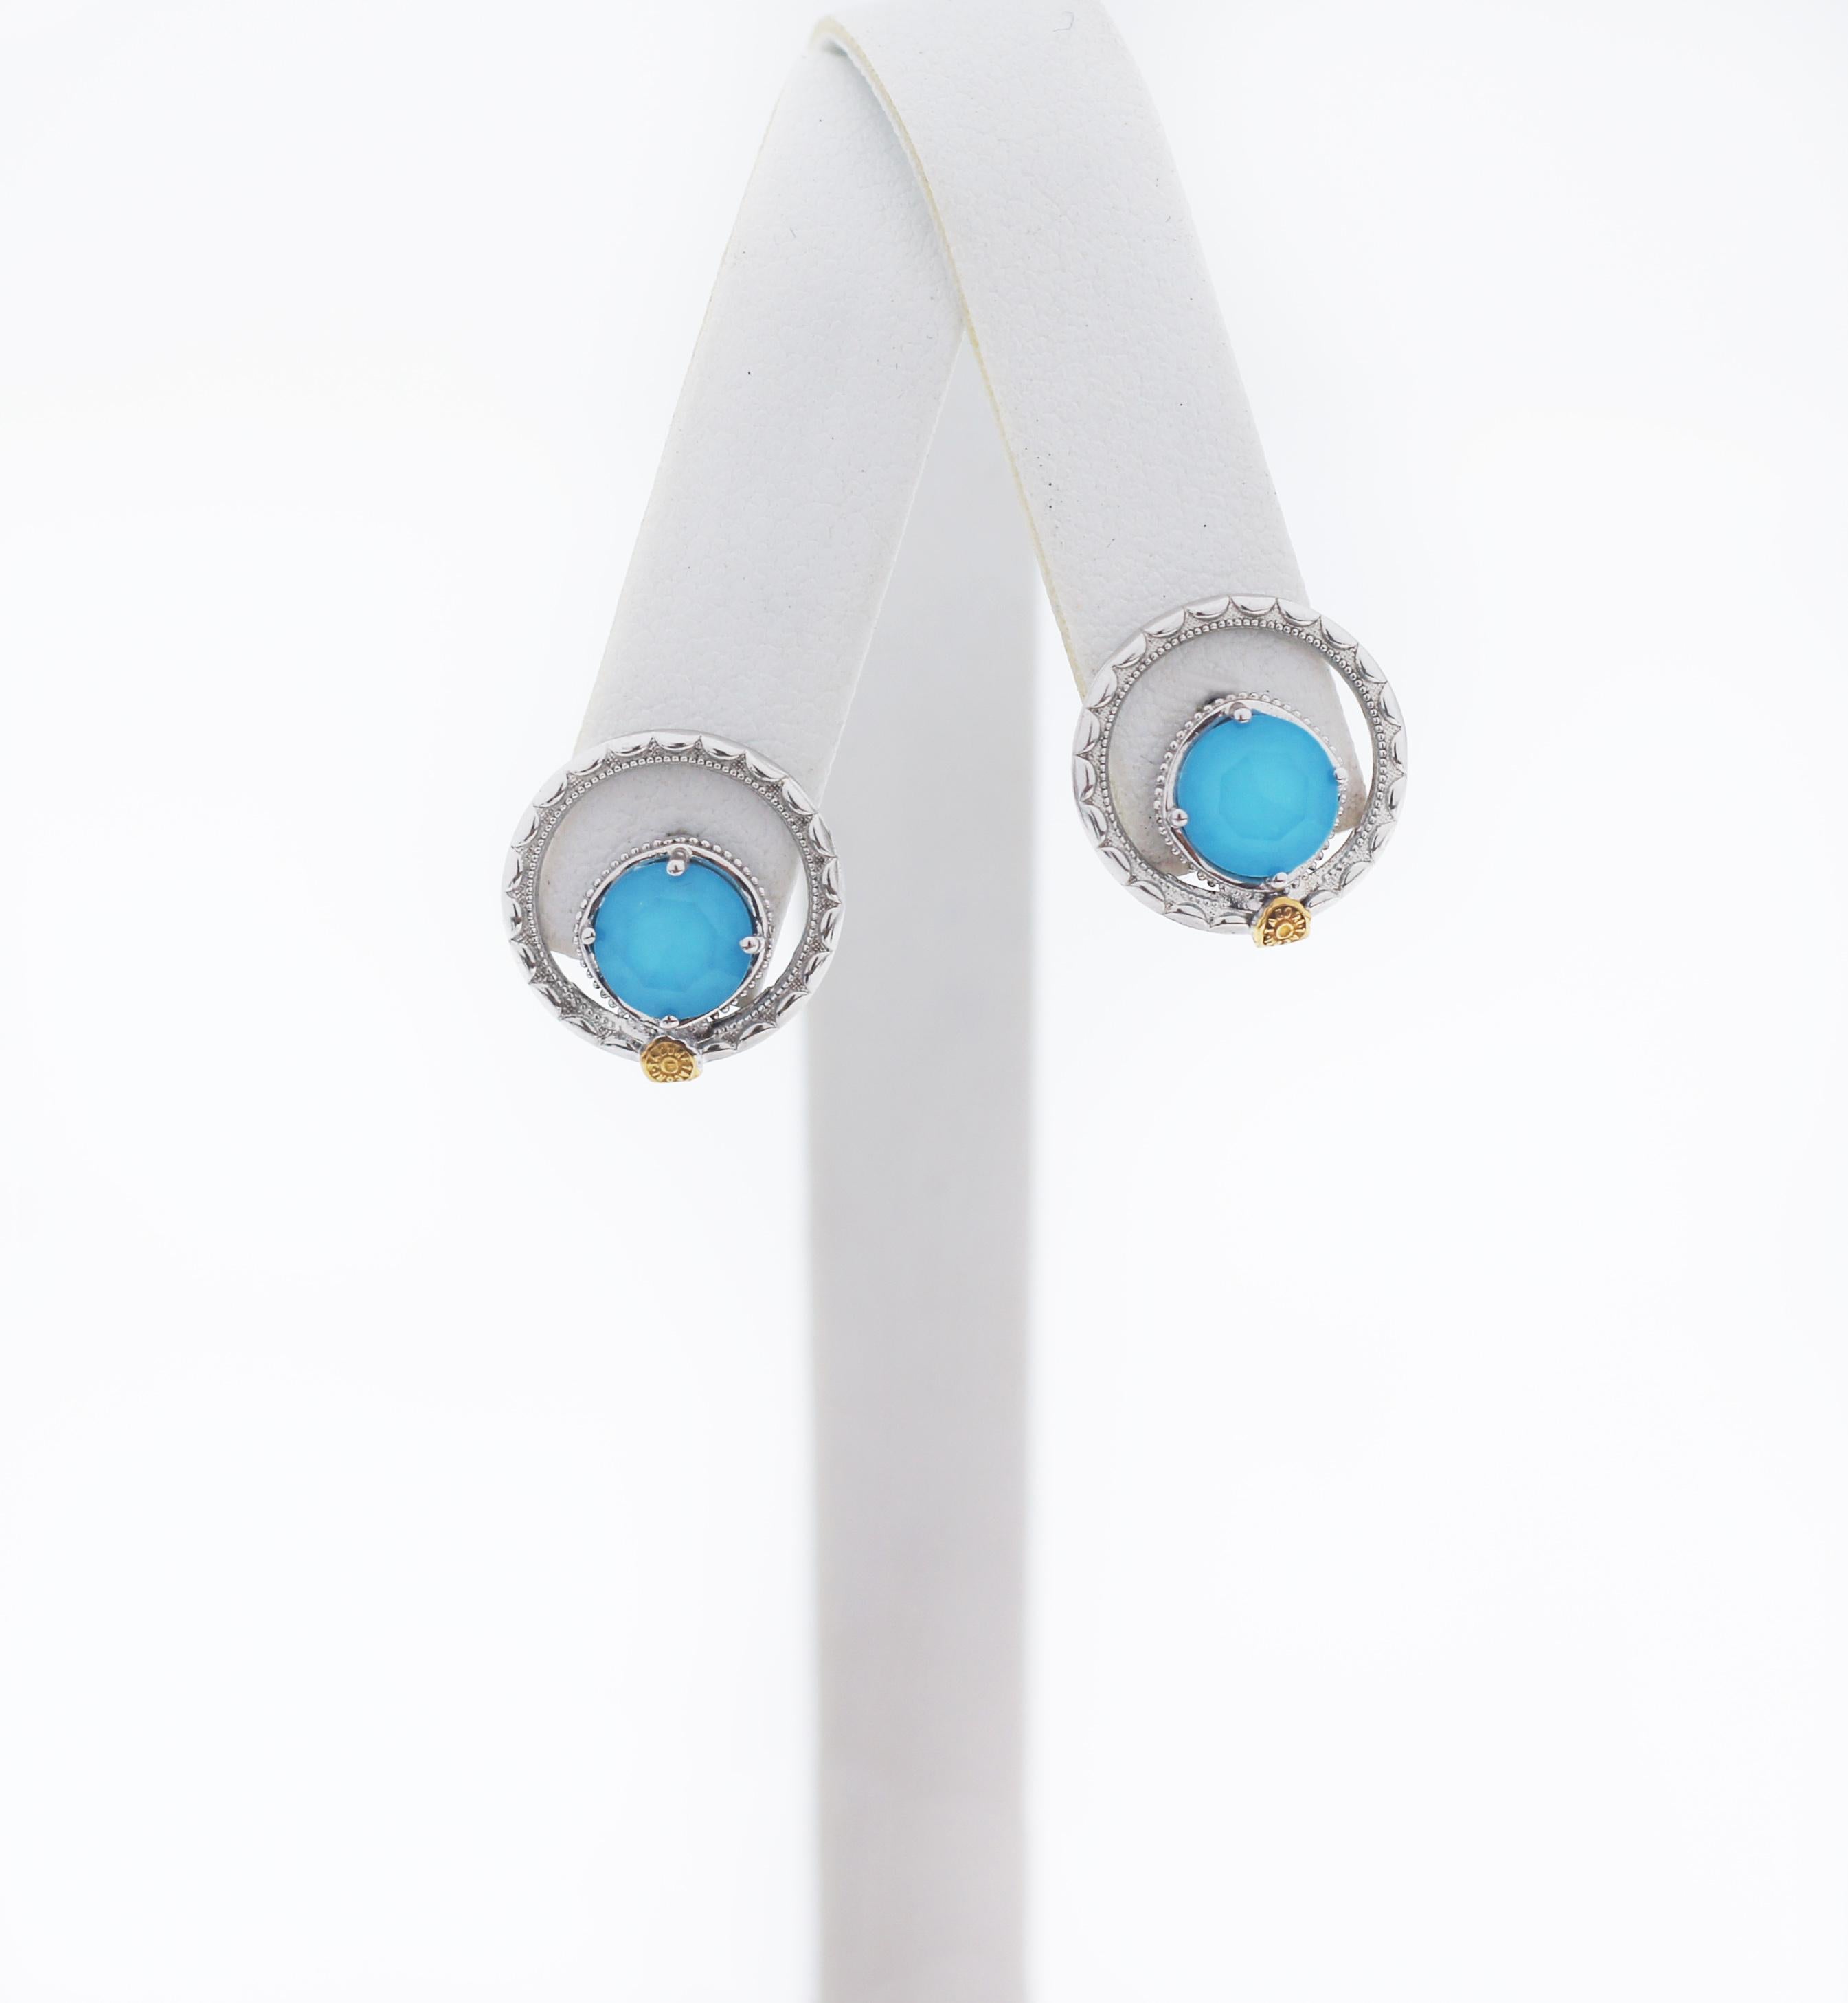 TACORI
Gemma Bloom
Silver Bloom Gem Studs
Featuring NEO TURQUOISE
Model: SE14005
7mm GemStone
Design measurements: 0.59IN WIDE BY 0.59IN LONG
Neo Turquoise gemstone encircled by a silver bloom, makes for an absolutely breathtaking design. Adorned